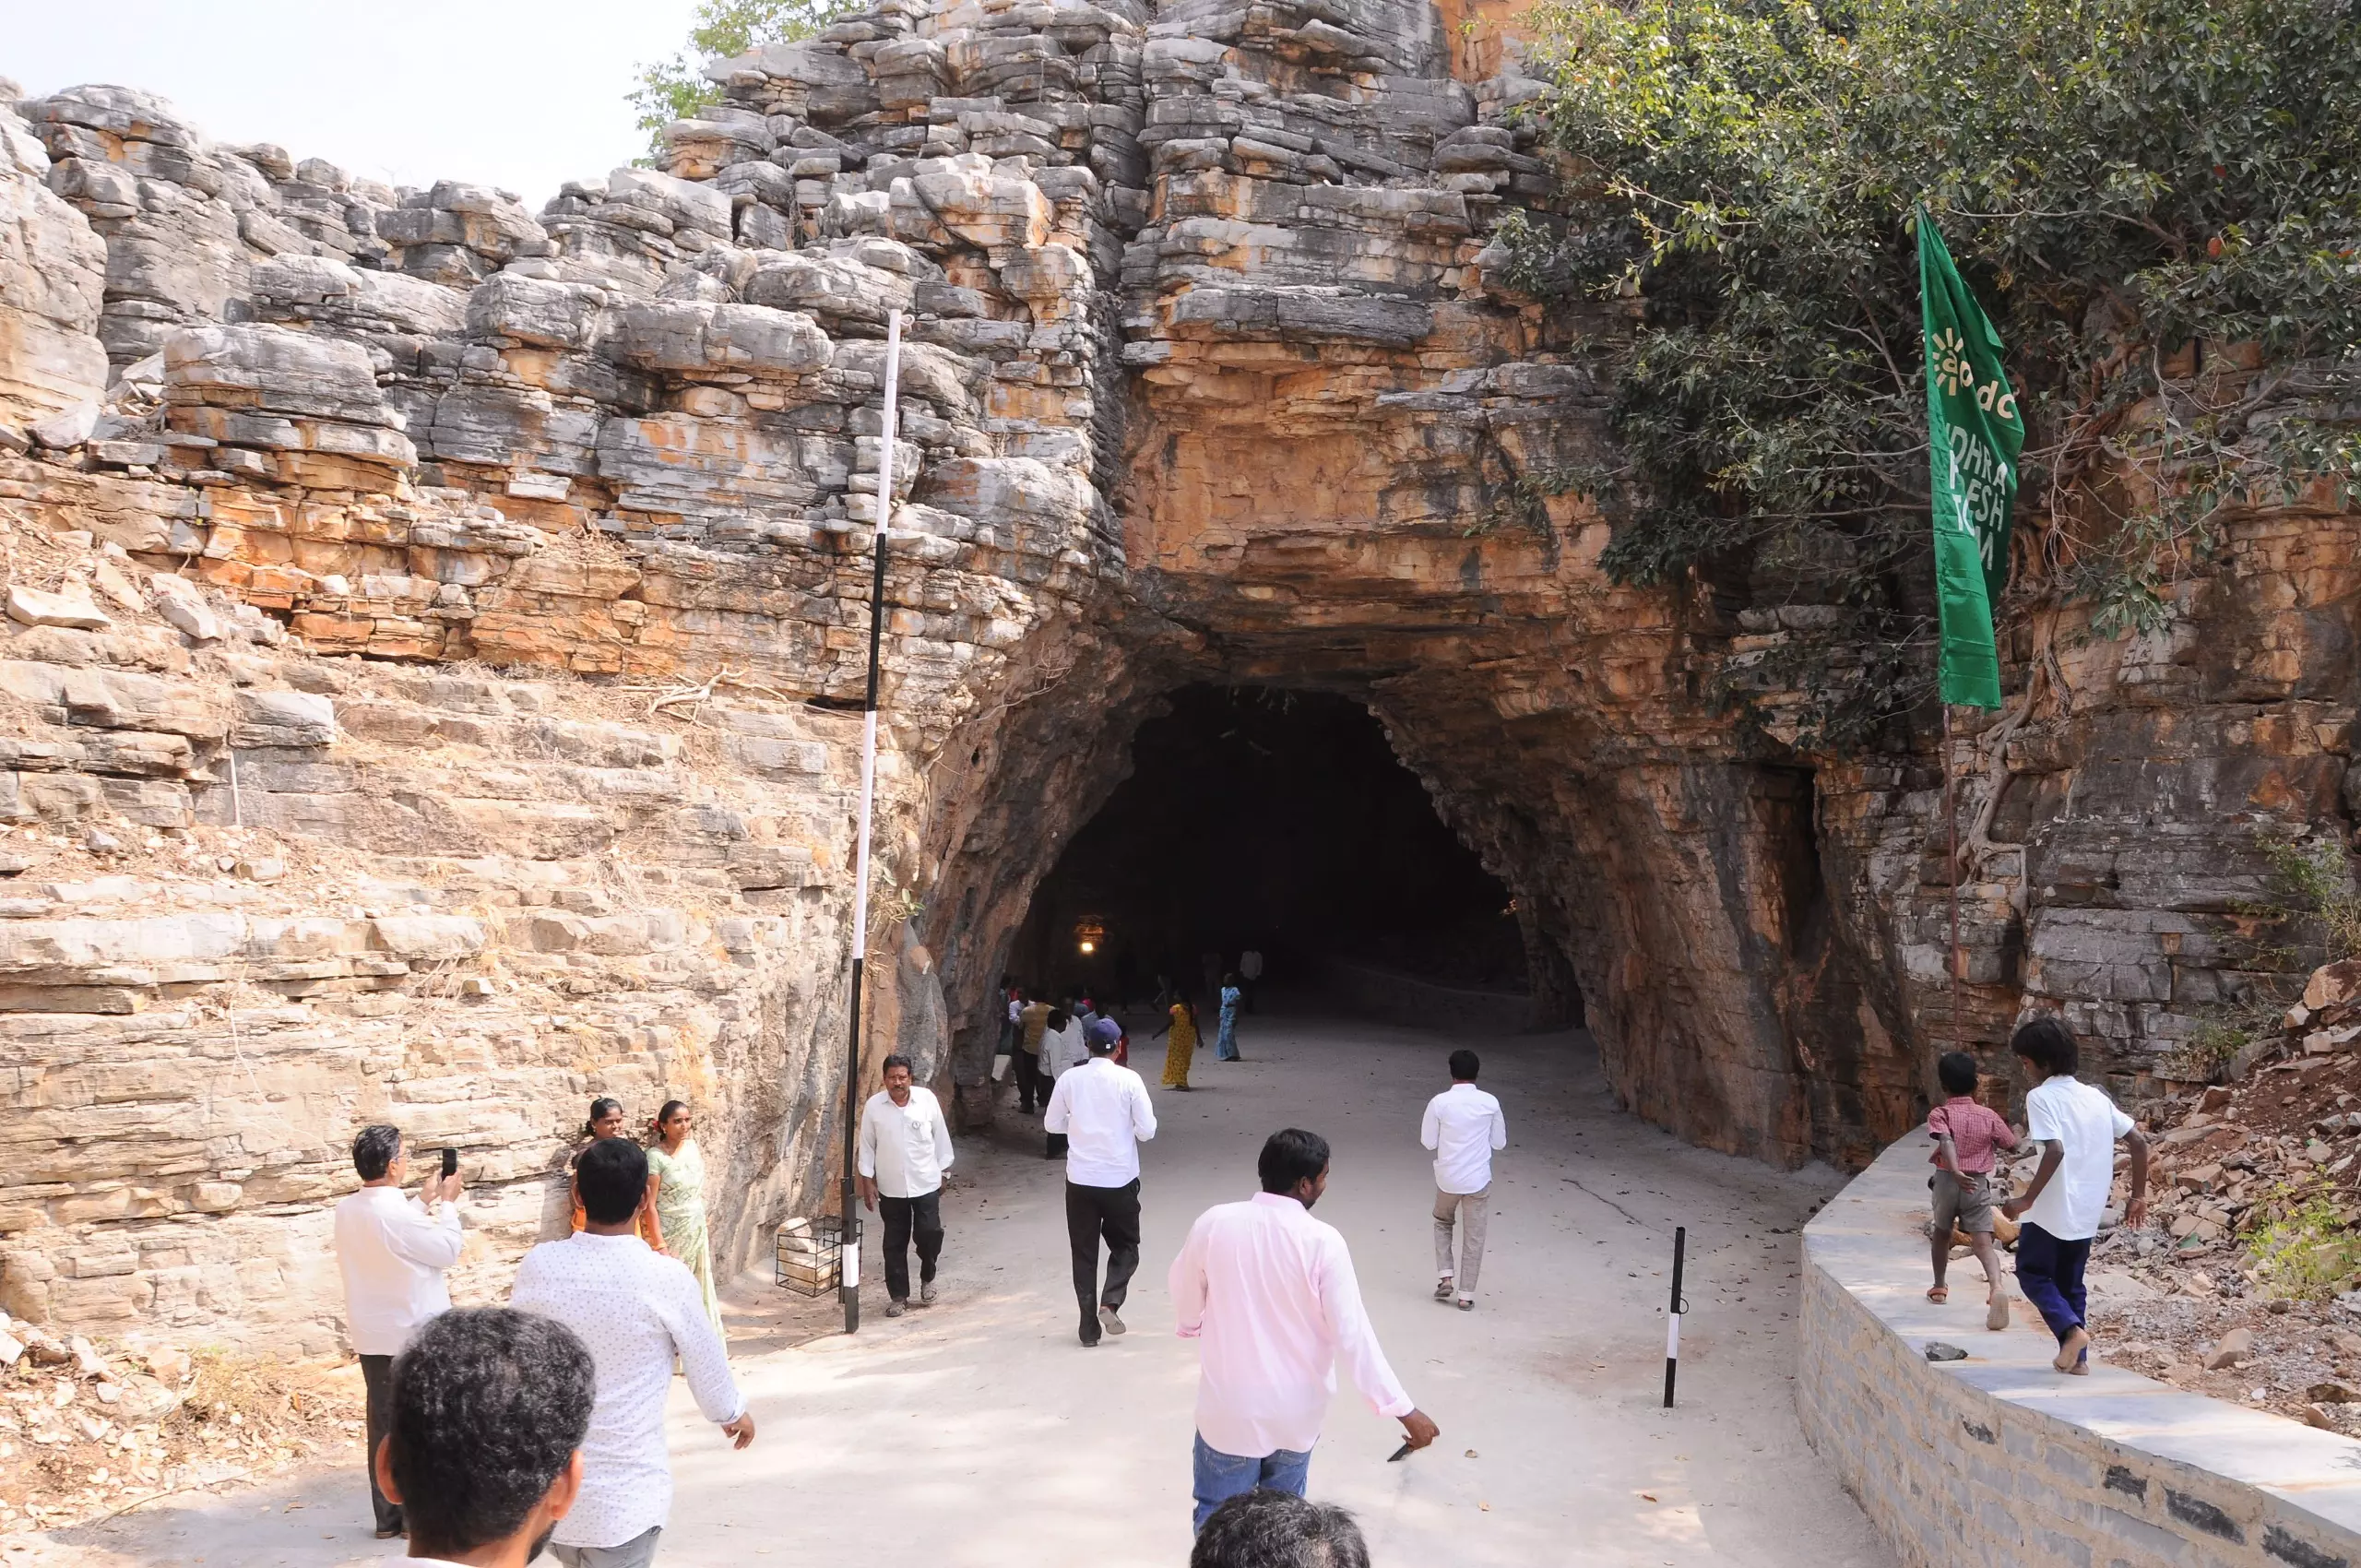 Two historical caves open to public after renovations